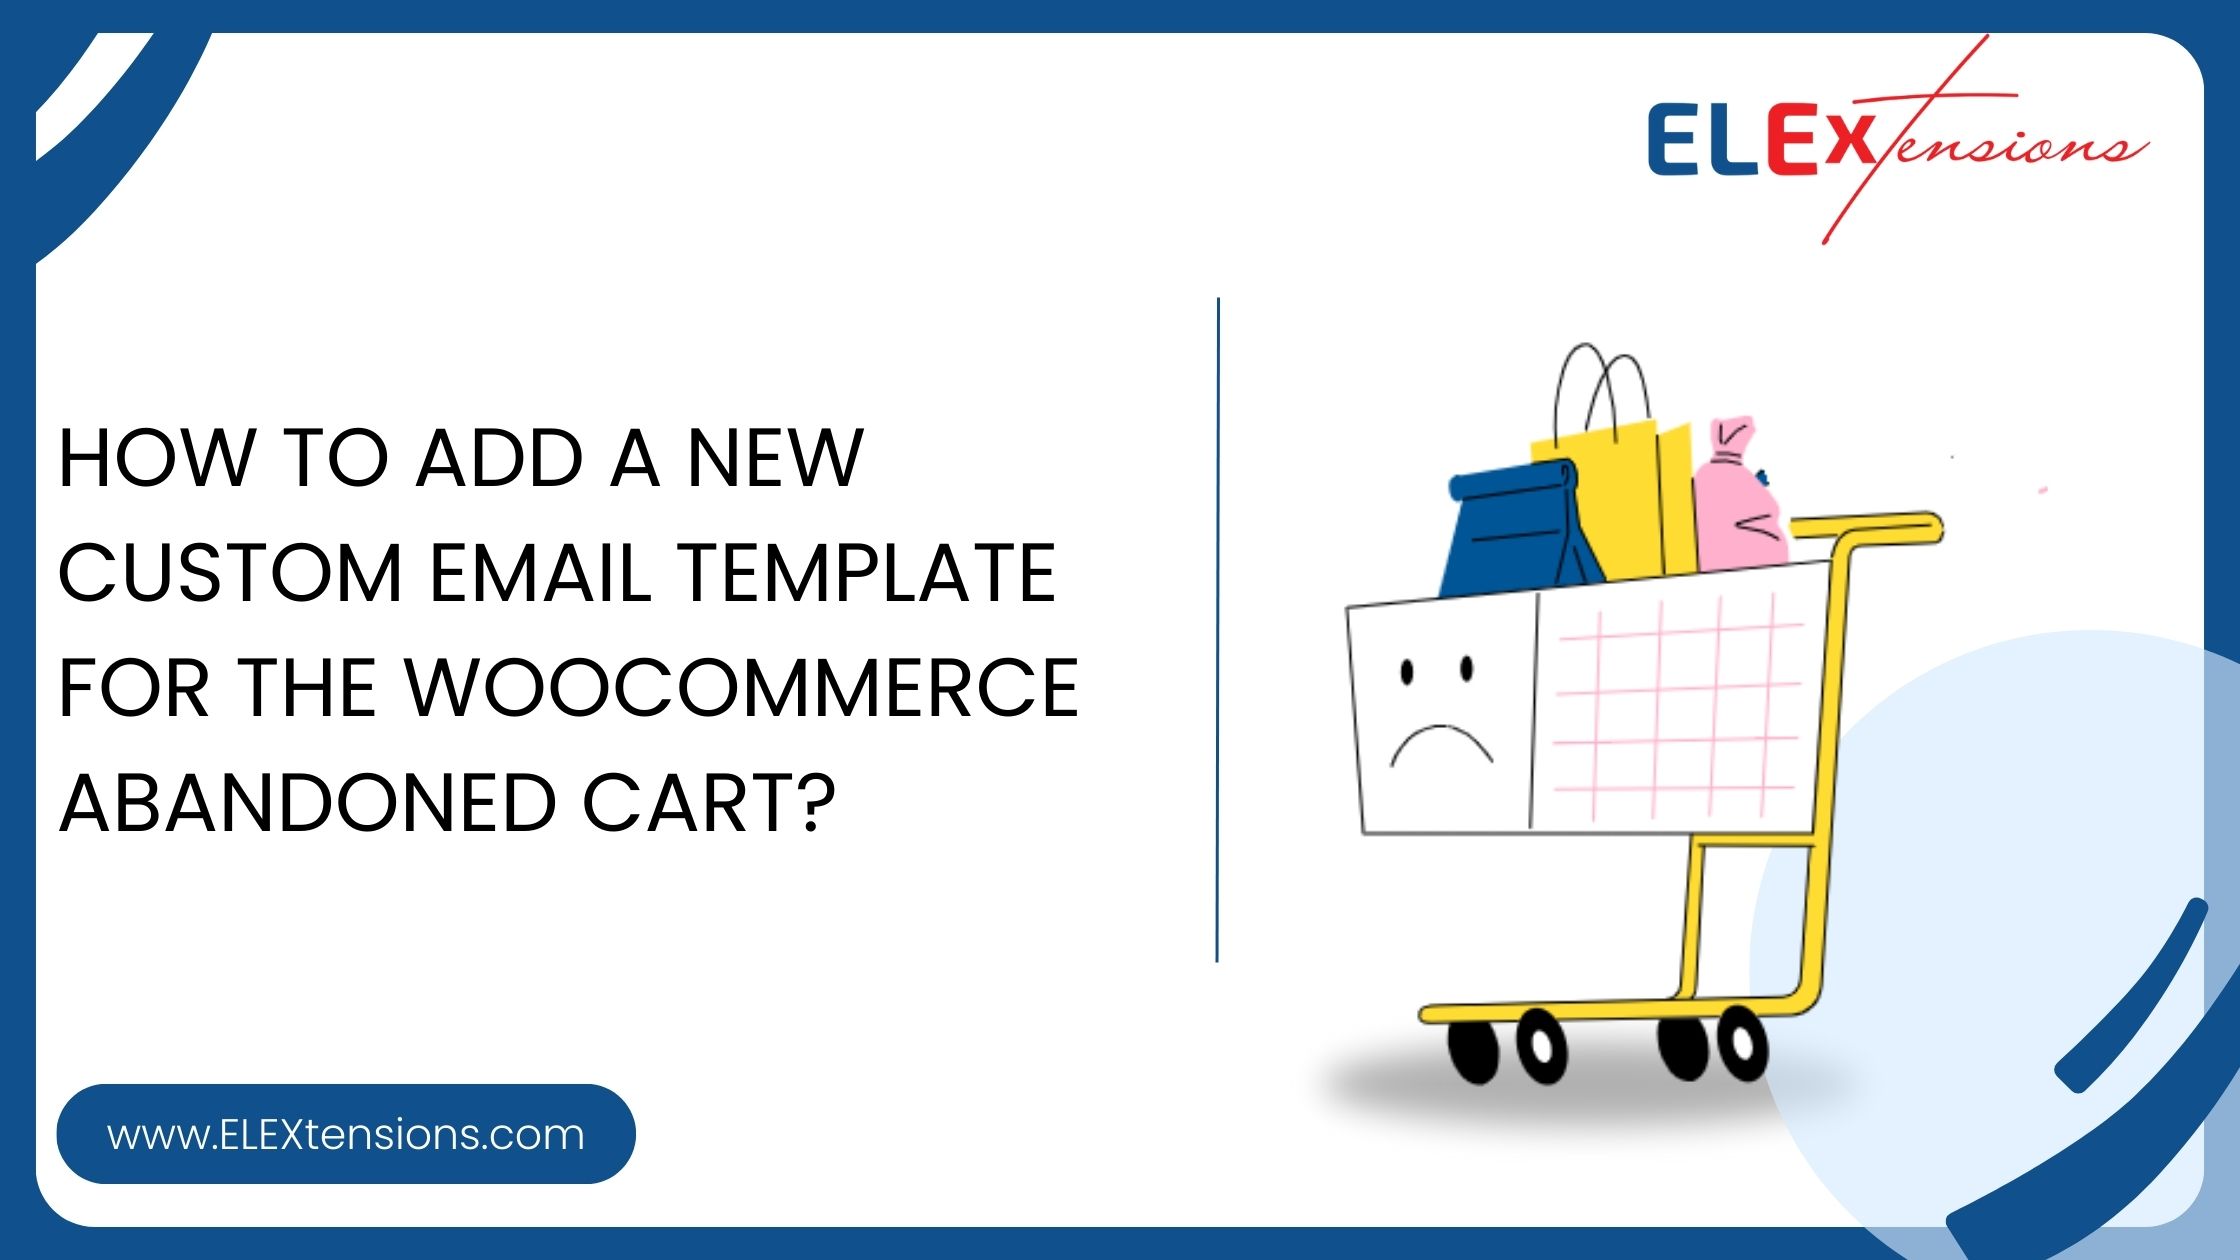 How To Add A New Custom Email Template For The Woocommerce Abandoned Cart